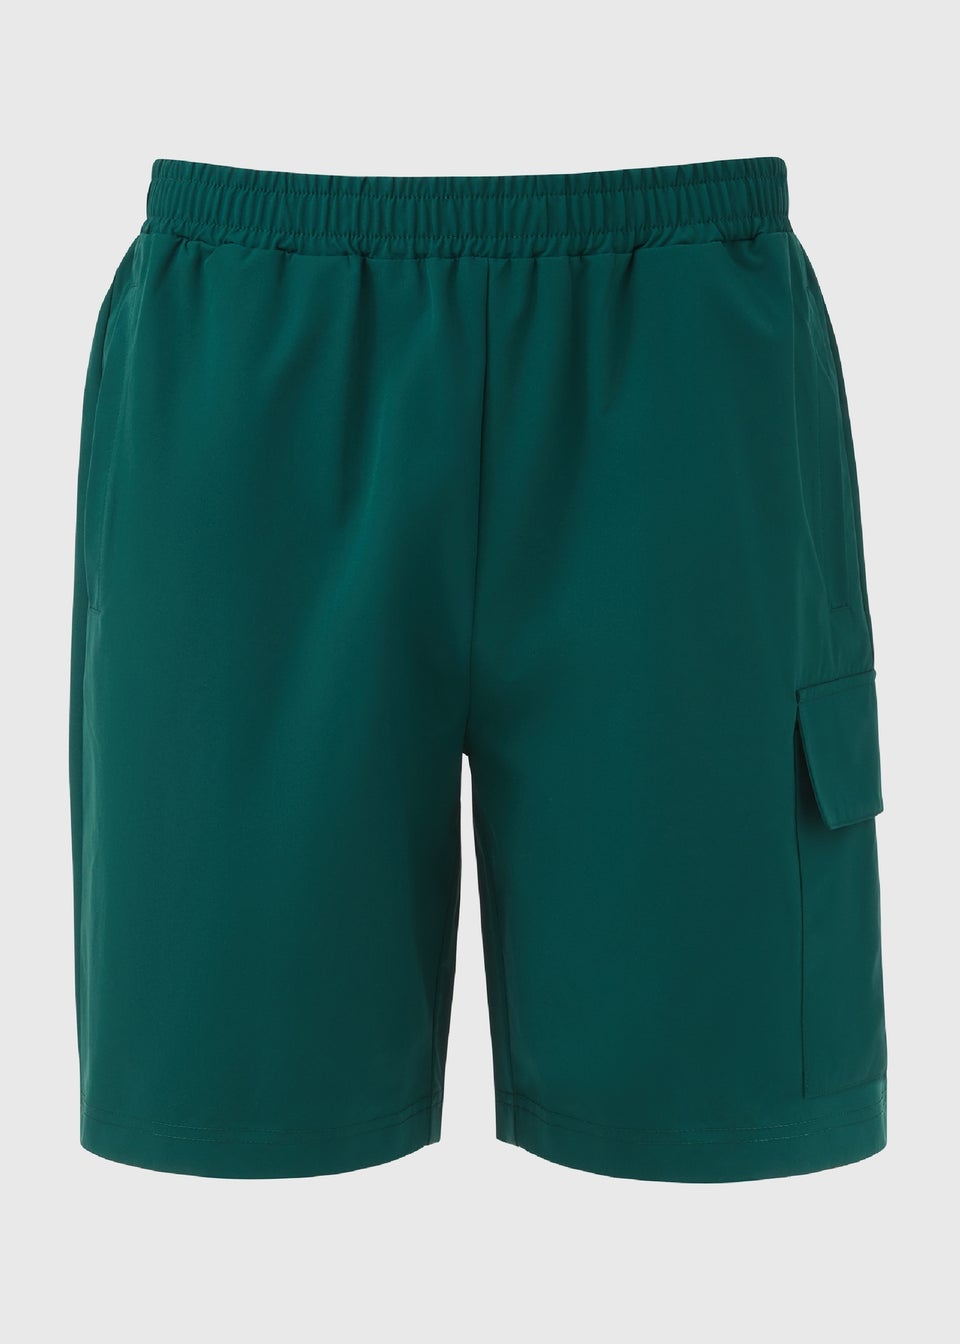 US Athletic Teal Cargo Shorts